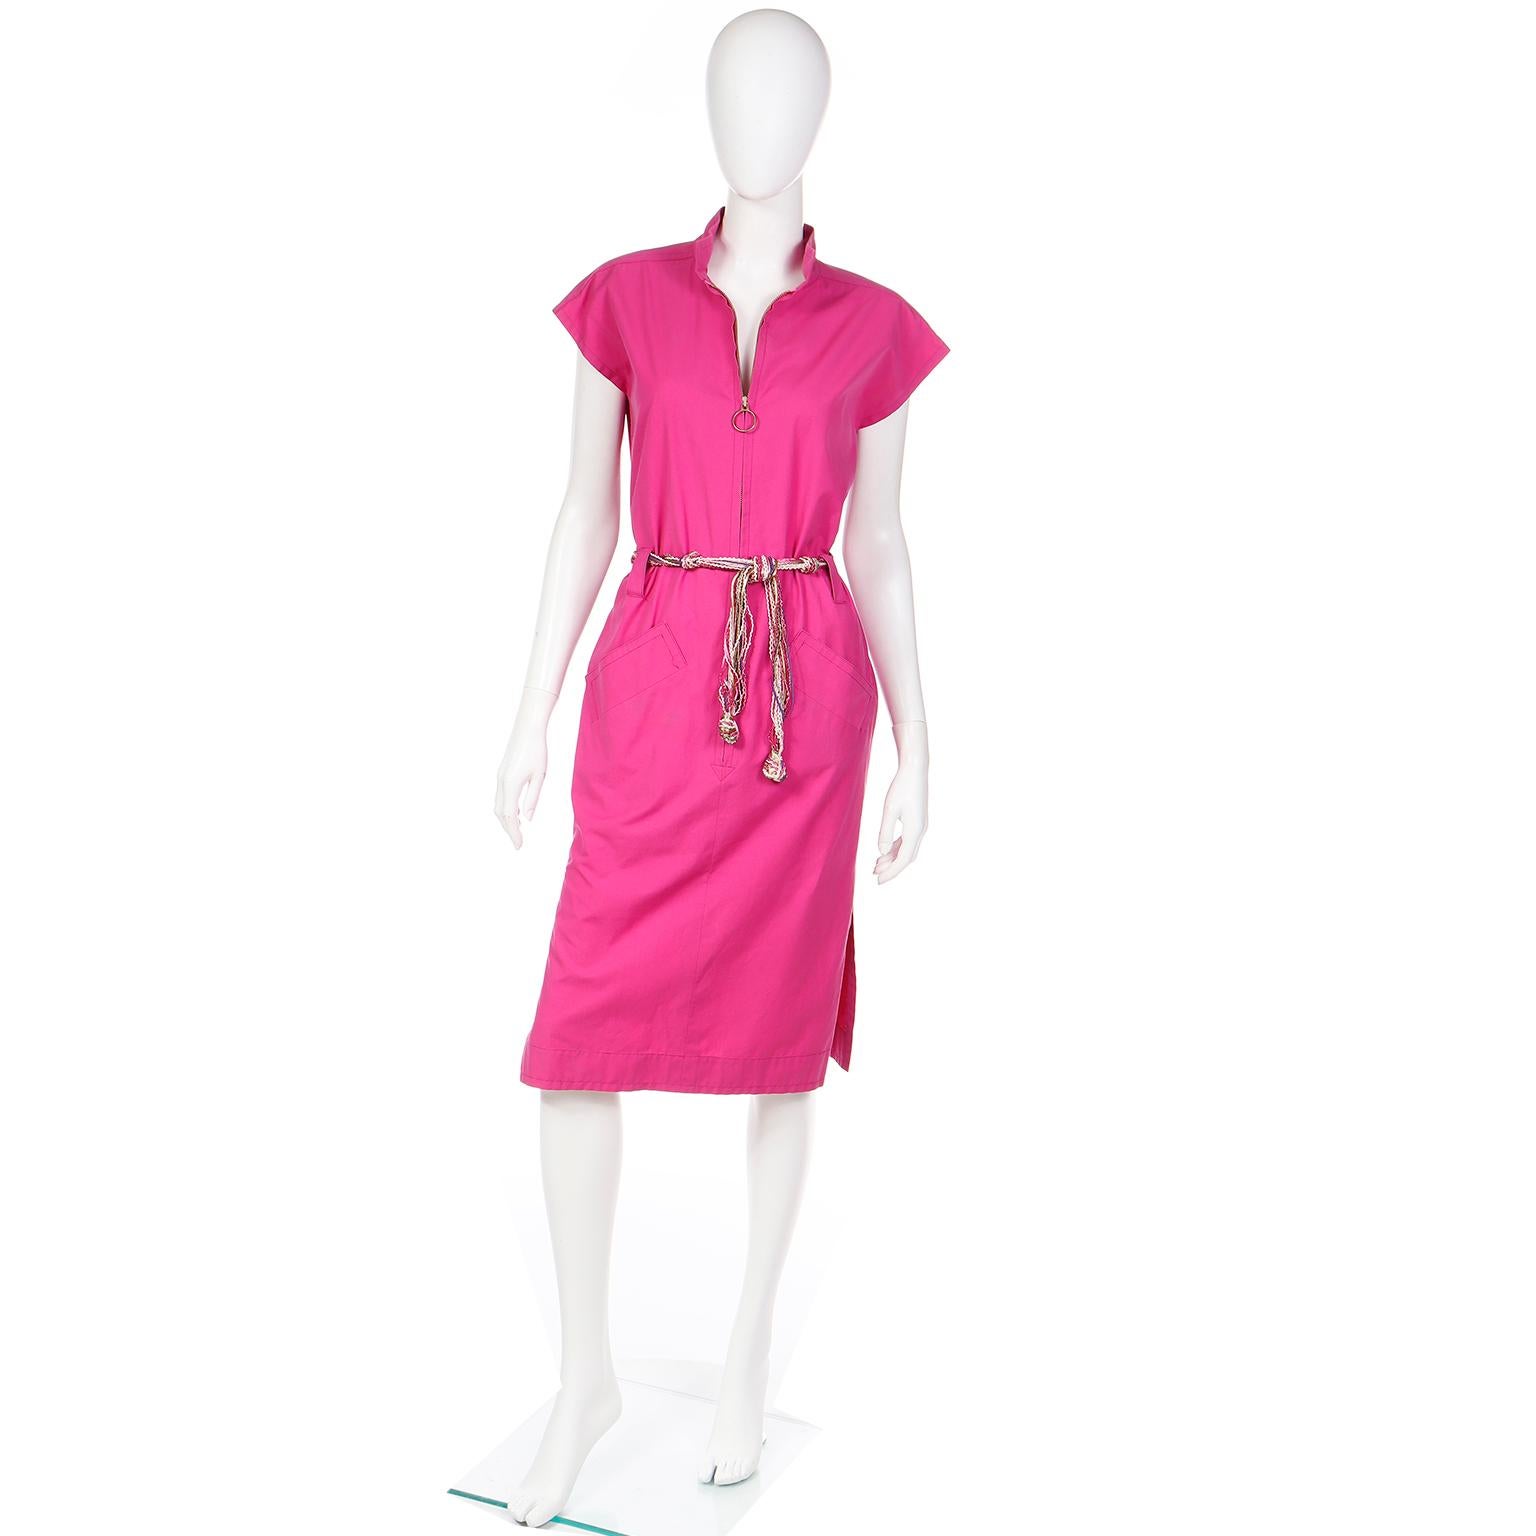 Yves Saint Laurent Vintage Pink Cotton Dress With Front Zipper & 2 Belt Options In Excellent Condition For Sale In Portland, OR